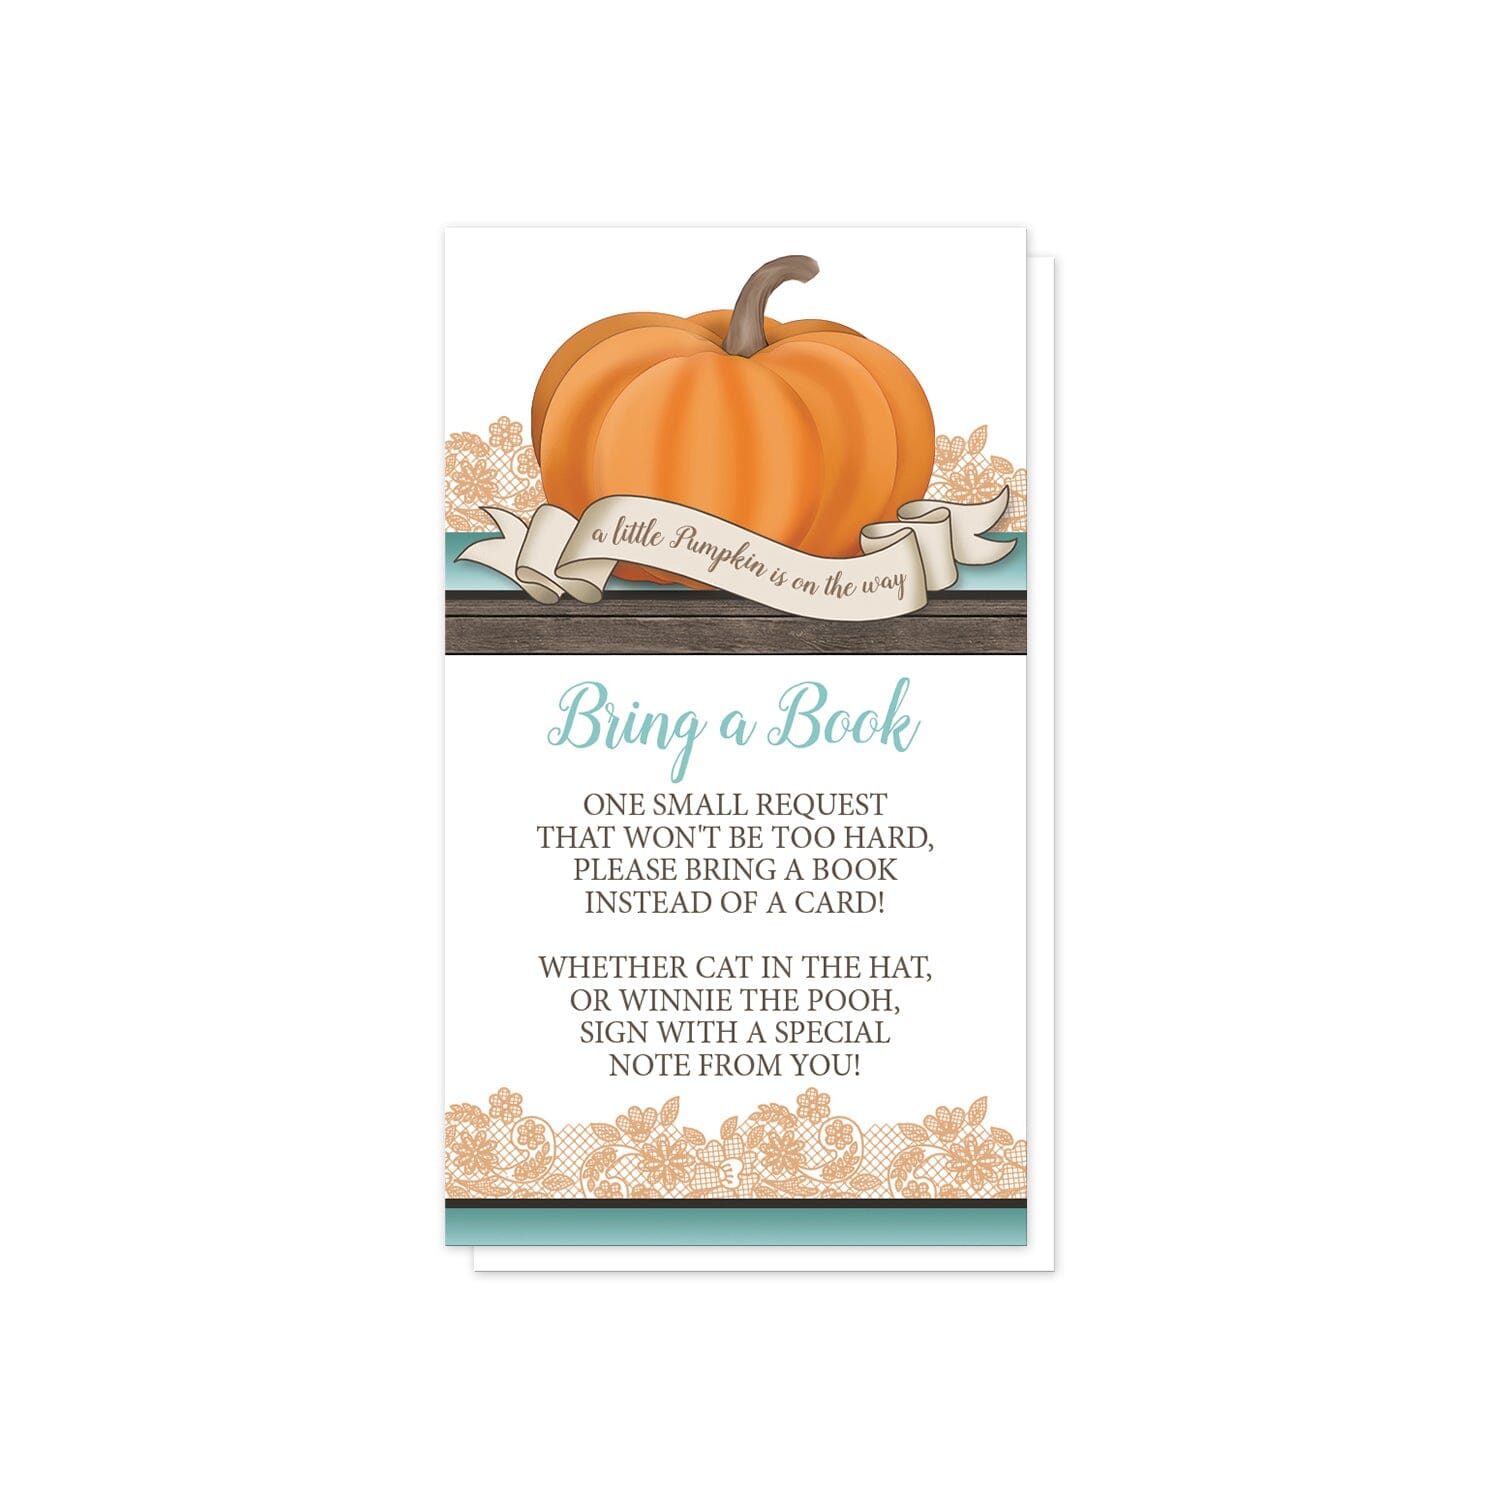 Rustic Orange Teal Pumpkin Bring a Book Cards at Artistically Invited. Cute rustic orange teal pumpkin bring a book cards with an illustration of an orange pumpkin on a horizontal teal stripe and a wood stripe with orange lace behind it, and a tiny ribbon banner that reads: "a little pumpkin is on the way". Your book request details are printed in teal and brown in the white area of the cards below the pumpkin. 